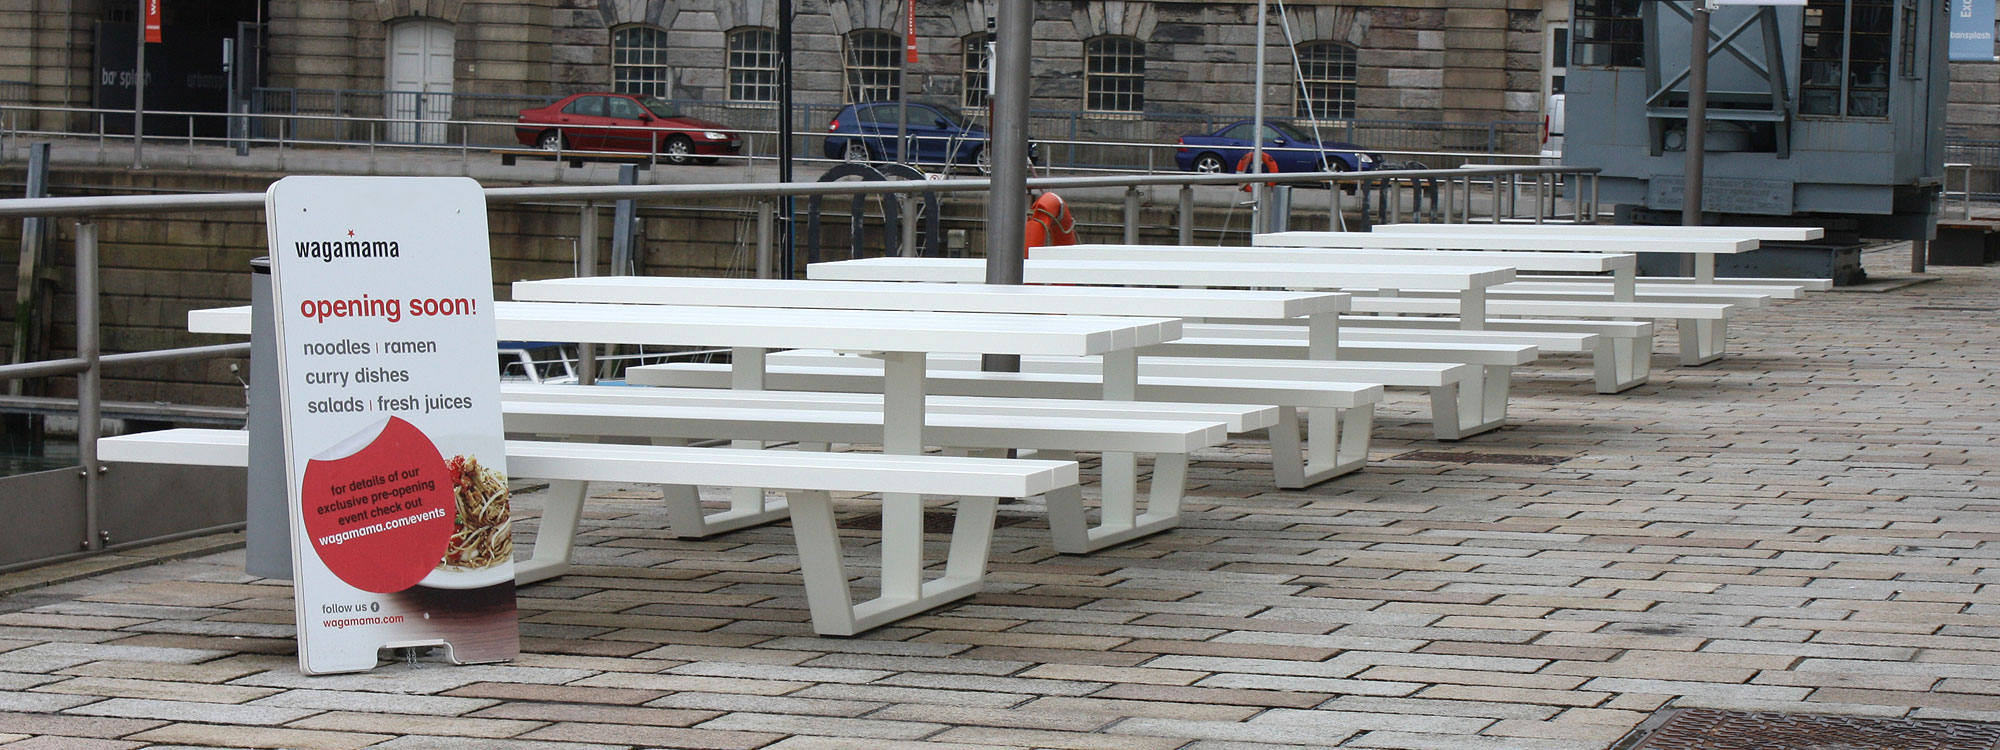 White Cassecroute MODERN Picnic Table & LUXURY PICNIC FURNITURE At Wagamama At Plymouth Historic Dockyard. SHORT Or LONG Picnic Table Sizes Up To 14m Made In High QUALITY Picnic Furniture Materials. Cassecroute DESIGNER Picnic FURNITURE Designed By Ronald Mattelé.